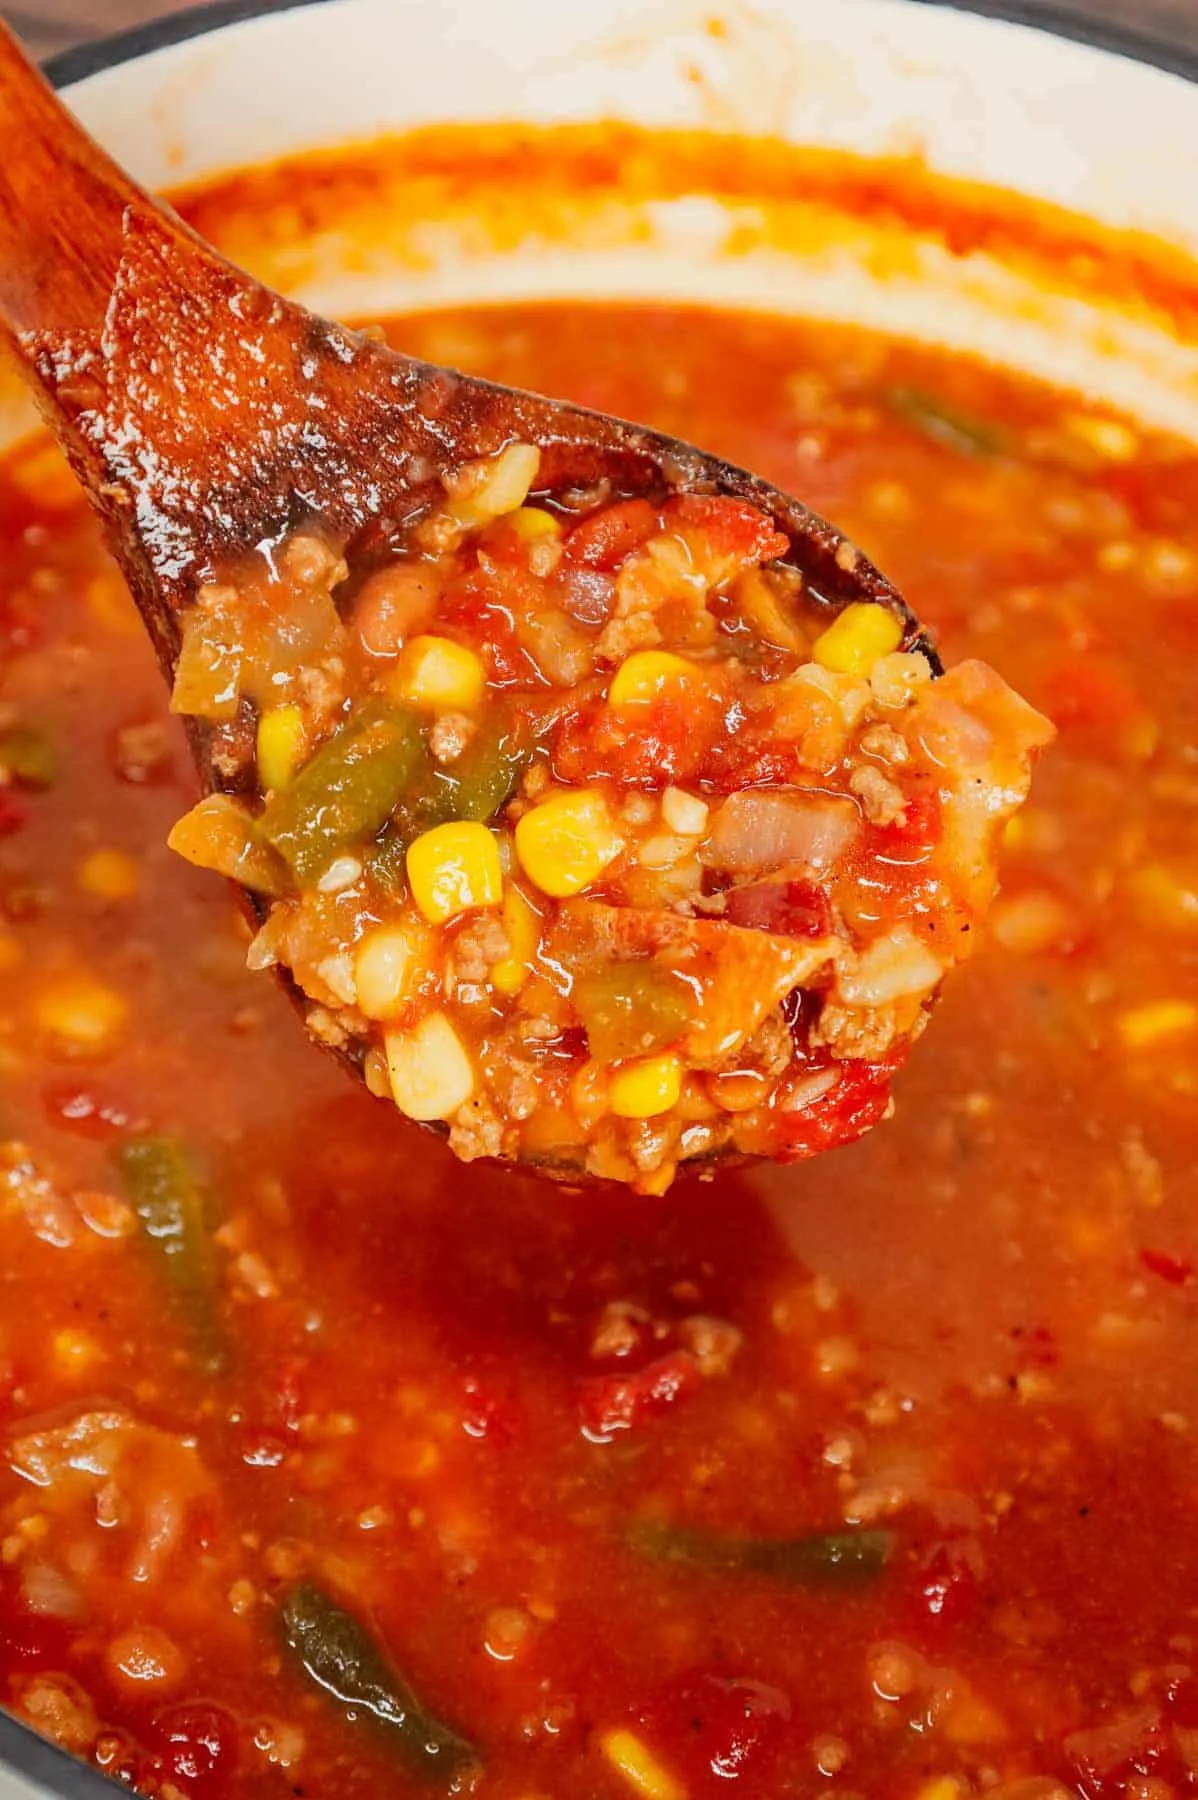 Cowboy Soup is hearty dish loaded with ground beef, bacon, Rotel, Bush's Original baked beans, green beans, corn and diced potatoes all in a flavourful broth.